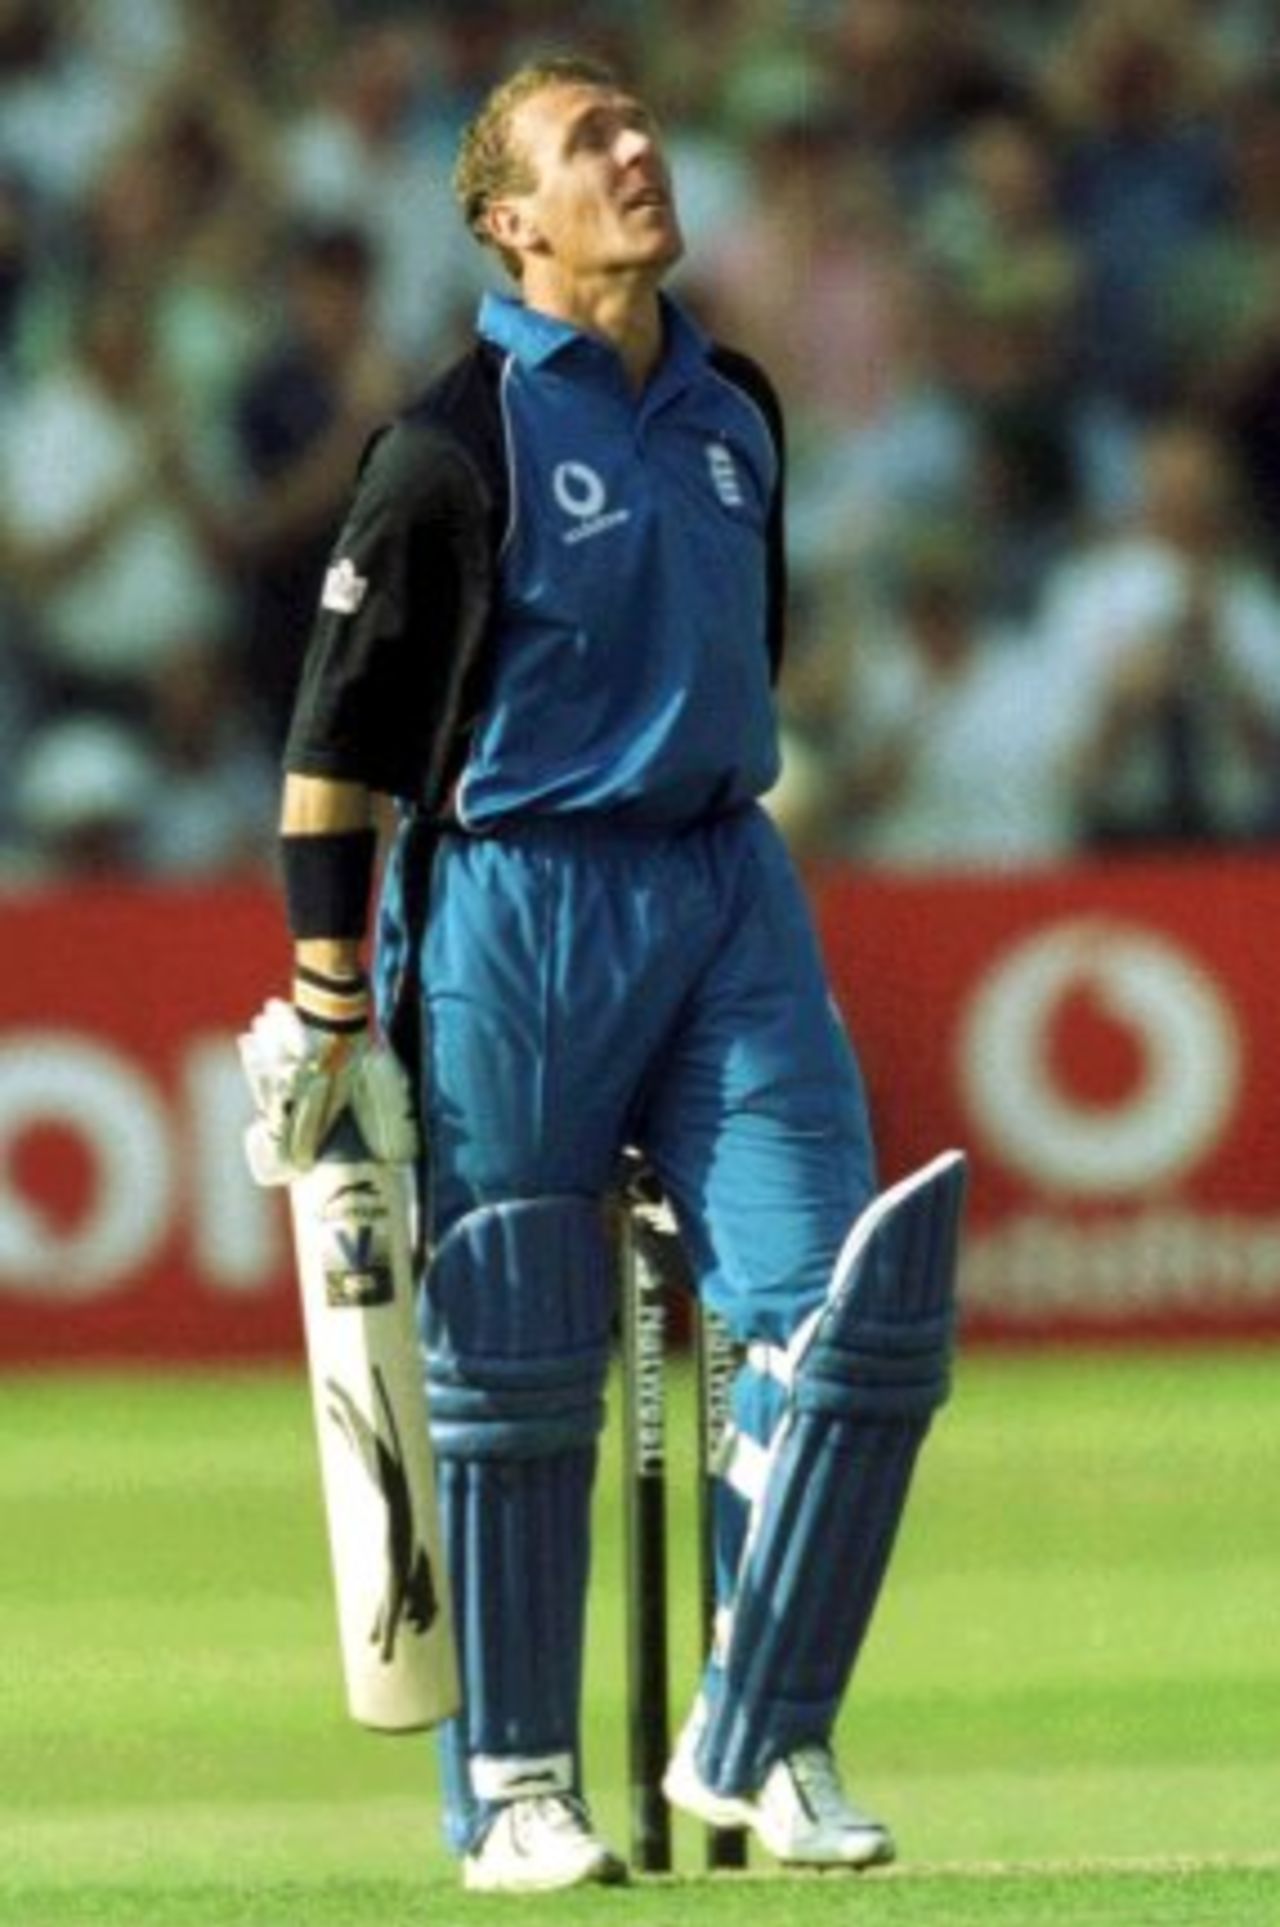 20 Jul 2000: Alec Stewart of England shows his disappointment as England lose to the West Indies during the NatWest Series One Day International between England and West Indies at Trent Bridge, Nottingham.